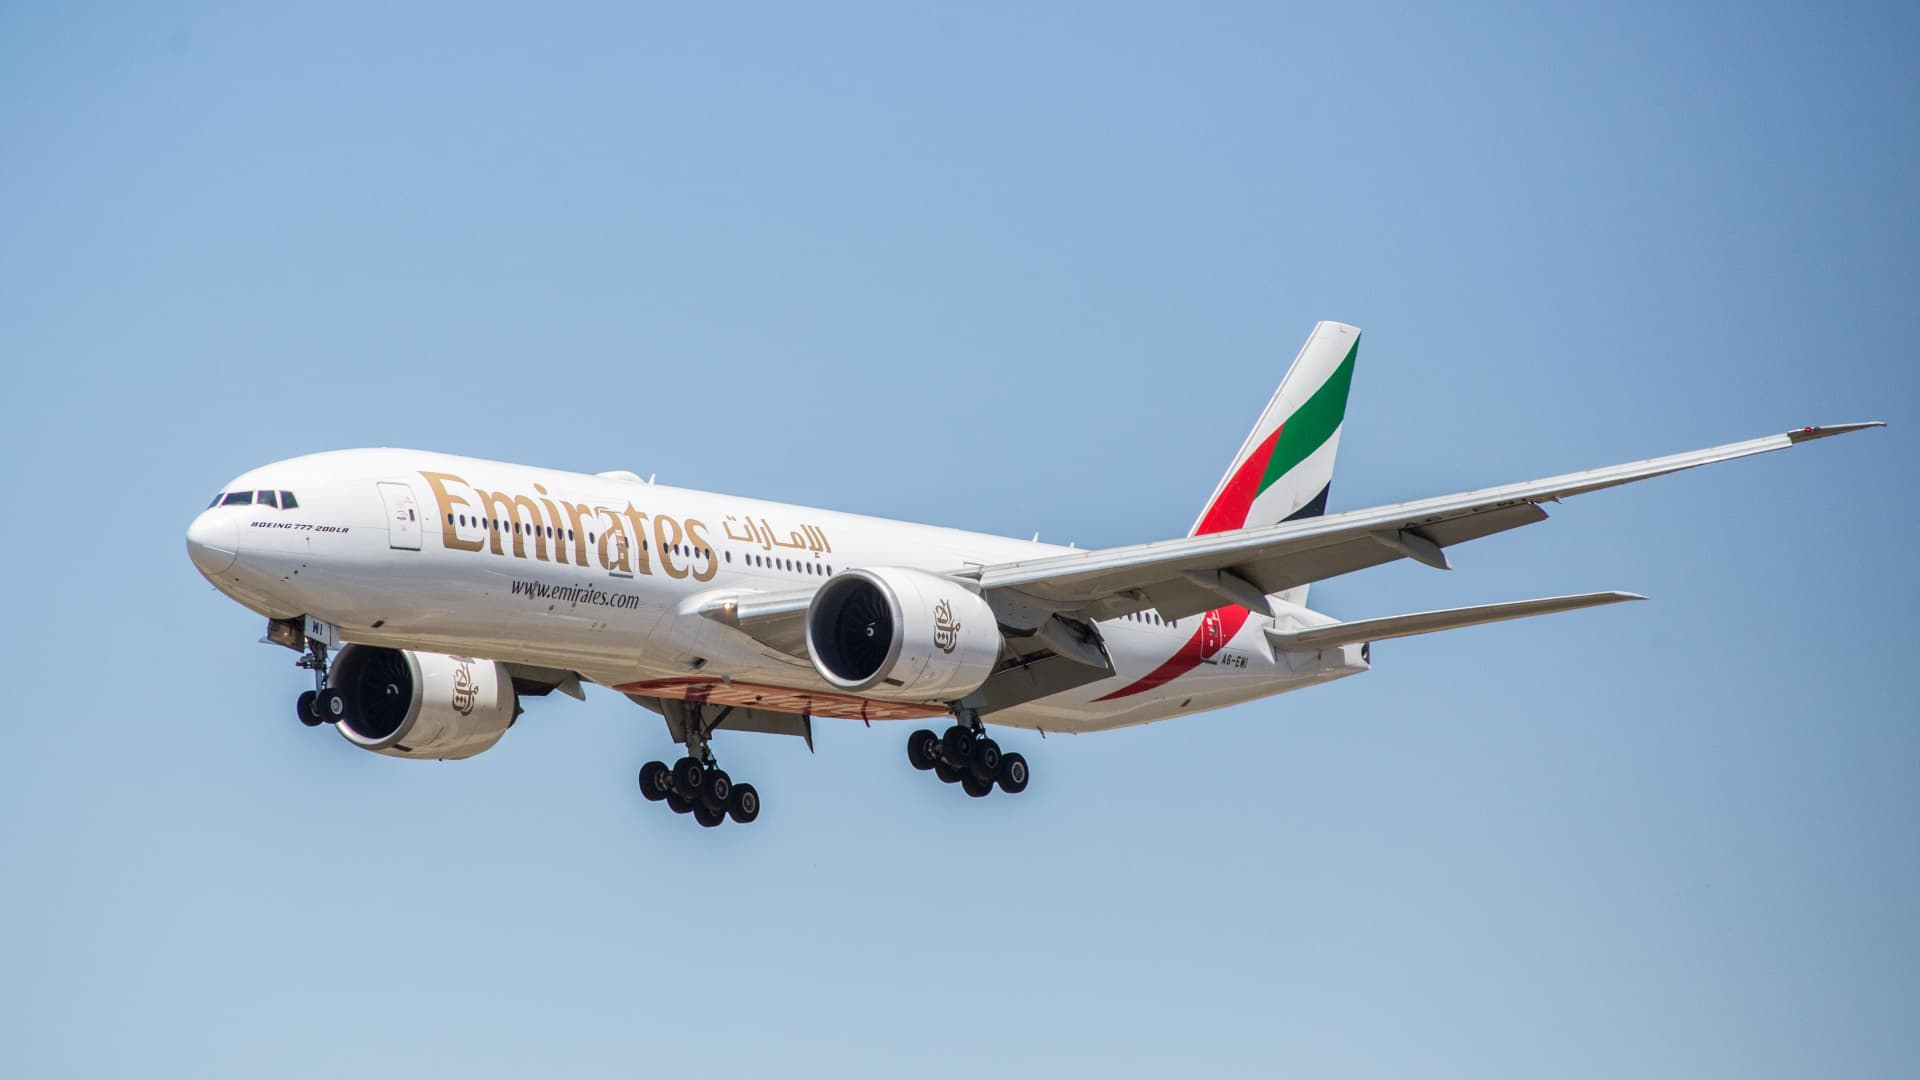 Emirates Airline refuses to comply with Heathrow's demand to cut flights